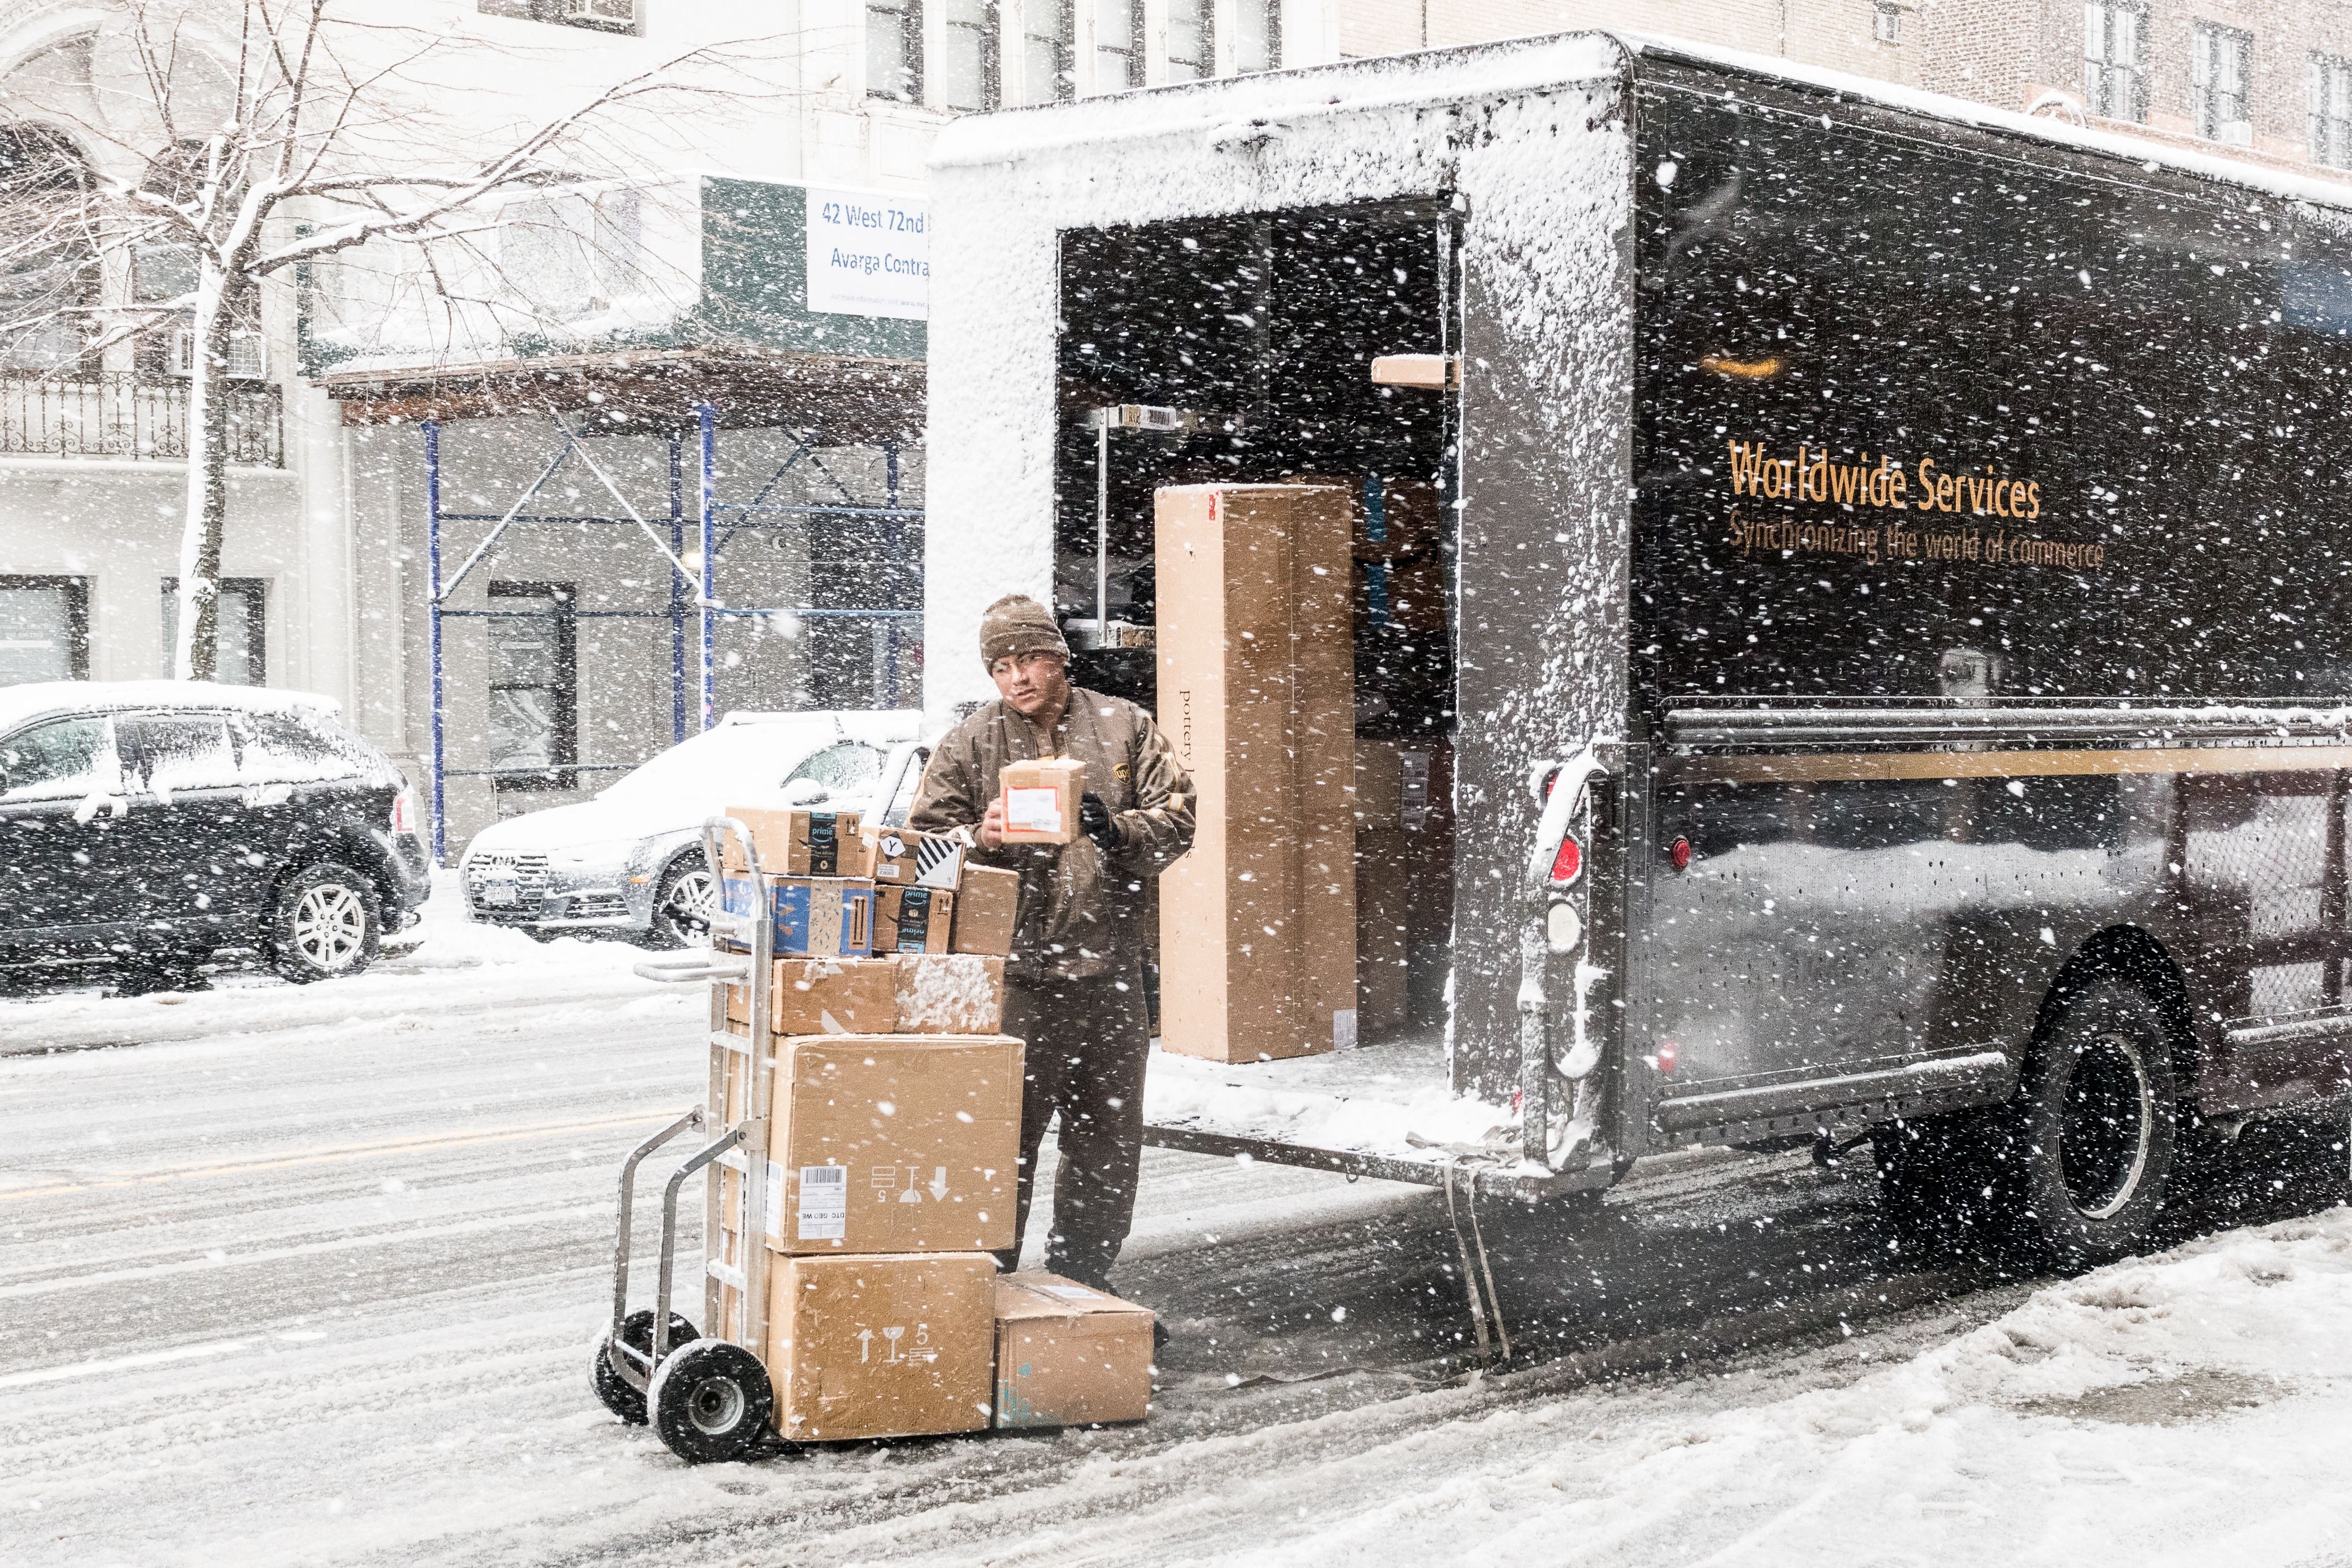 Mandatory Credit: Photo by Michael Brochstein/Sopa Images/Shutterstock (9472885d) Unloading a UPS (United Parcel Service) truck on West 72nd Street in a snow storm in New York City. Winter Storm Toby, New York, USA - 21 Mar 2018